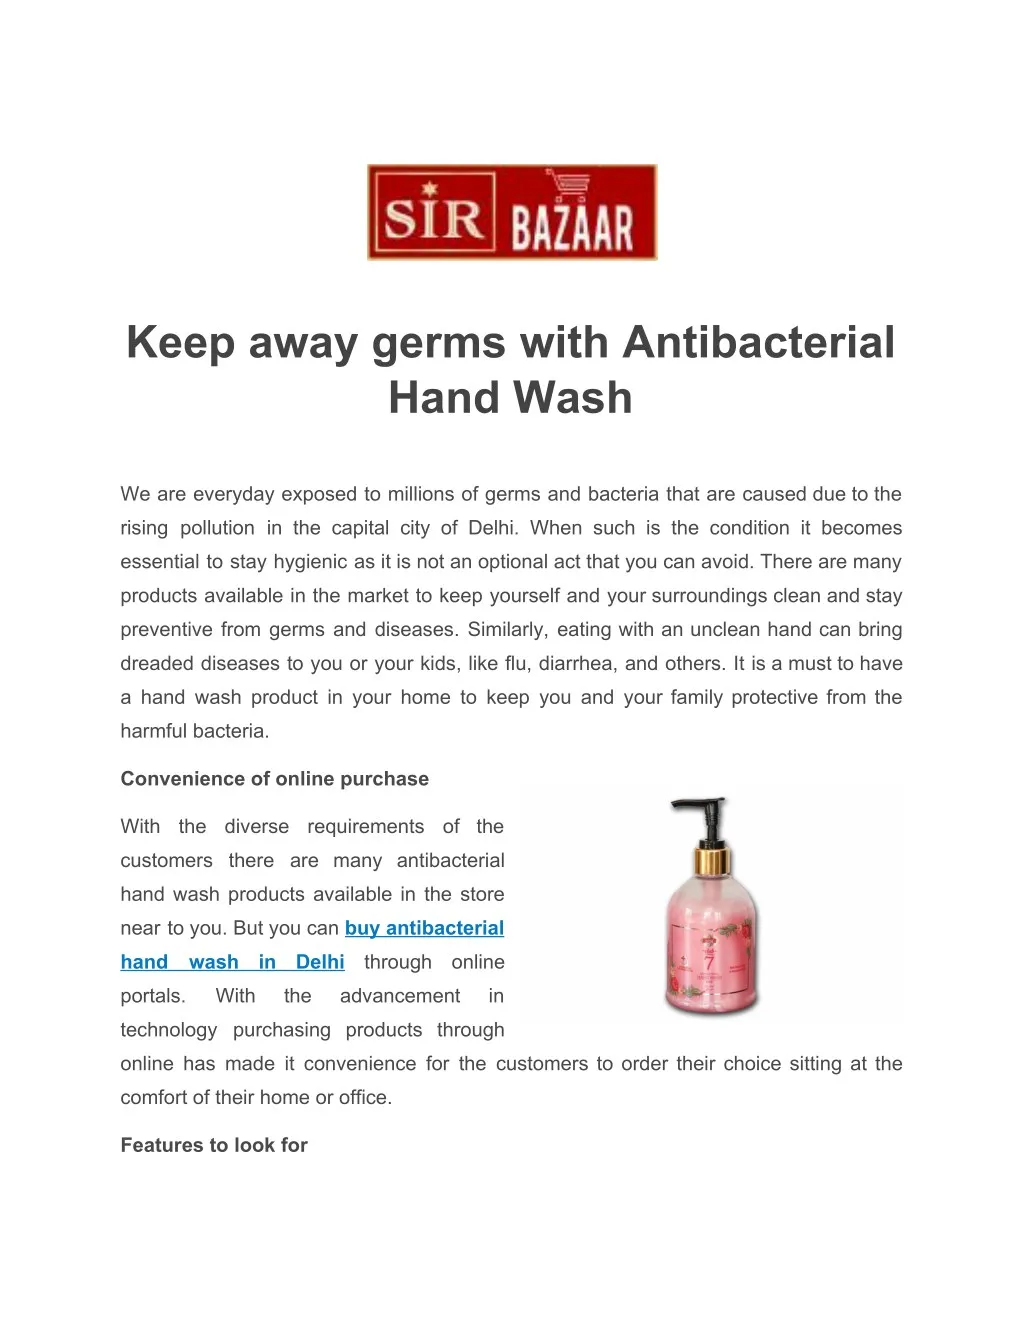 keep away germs with antibacterial hand wash